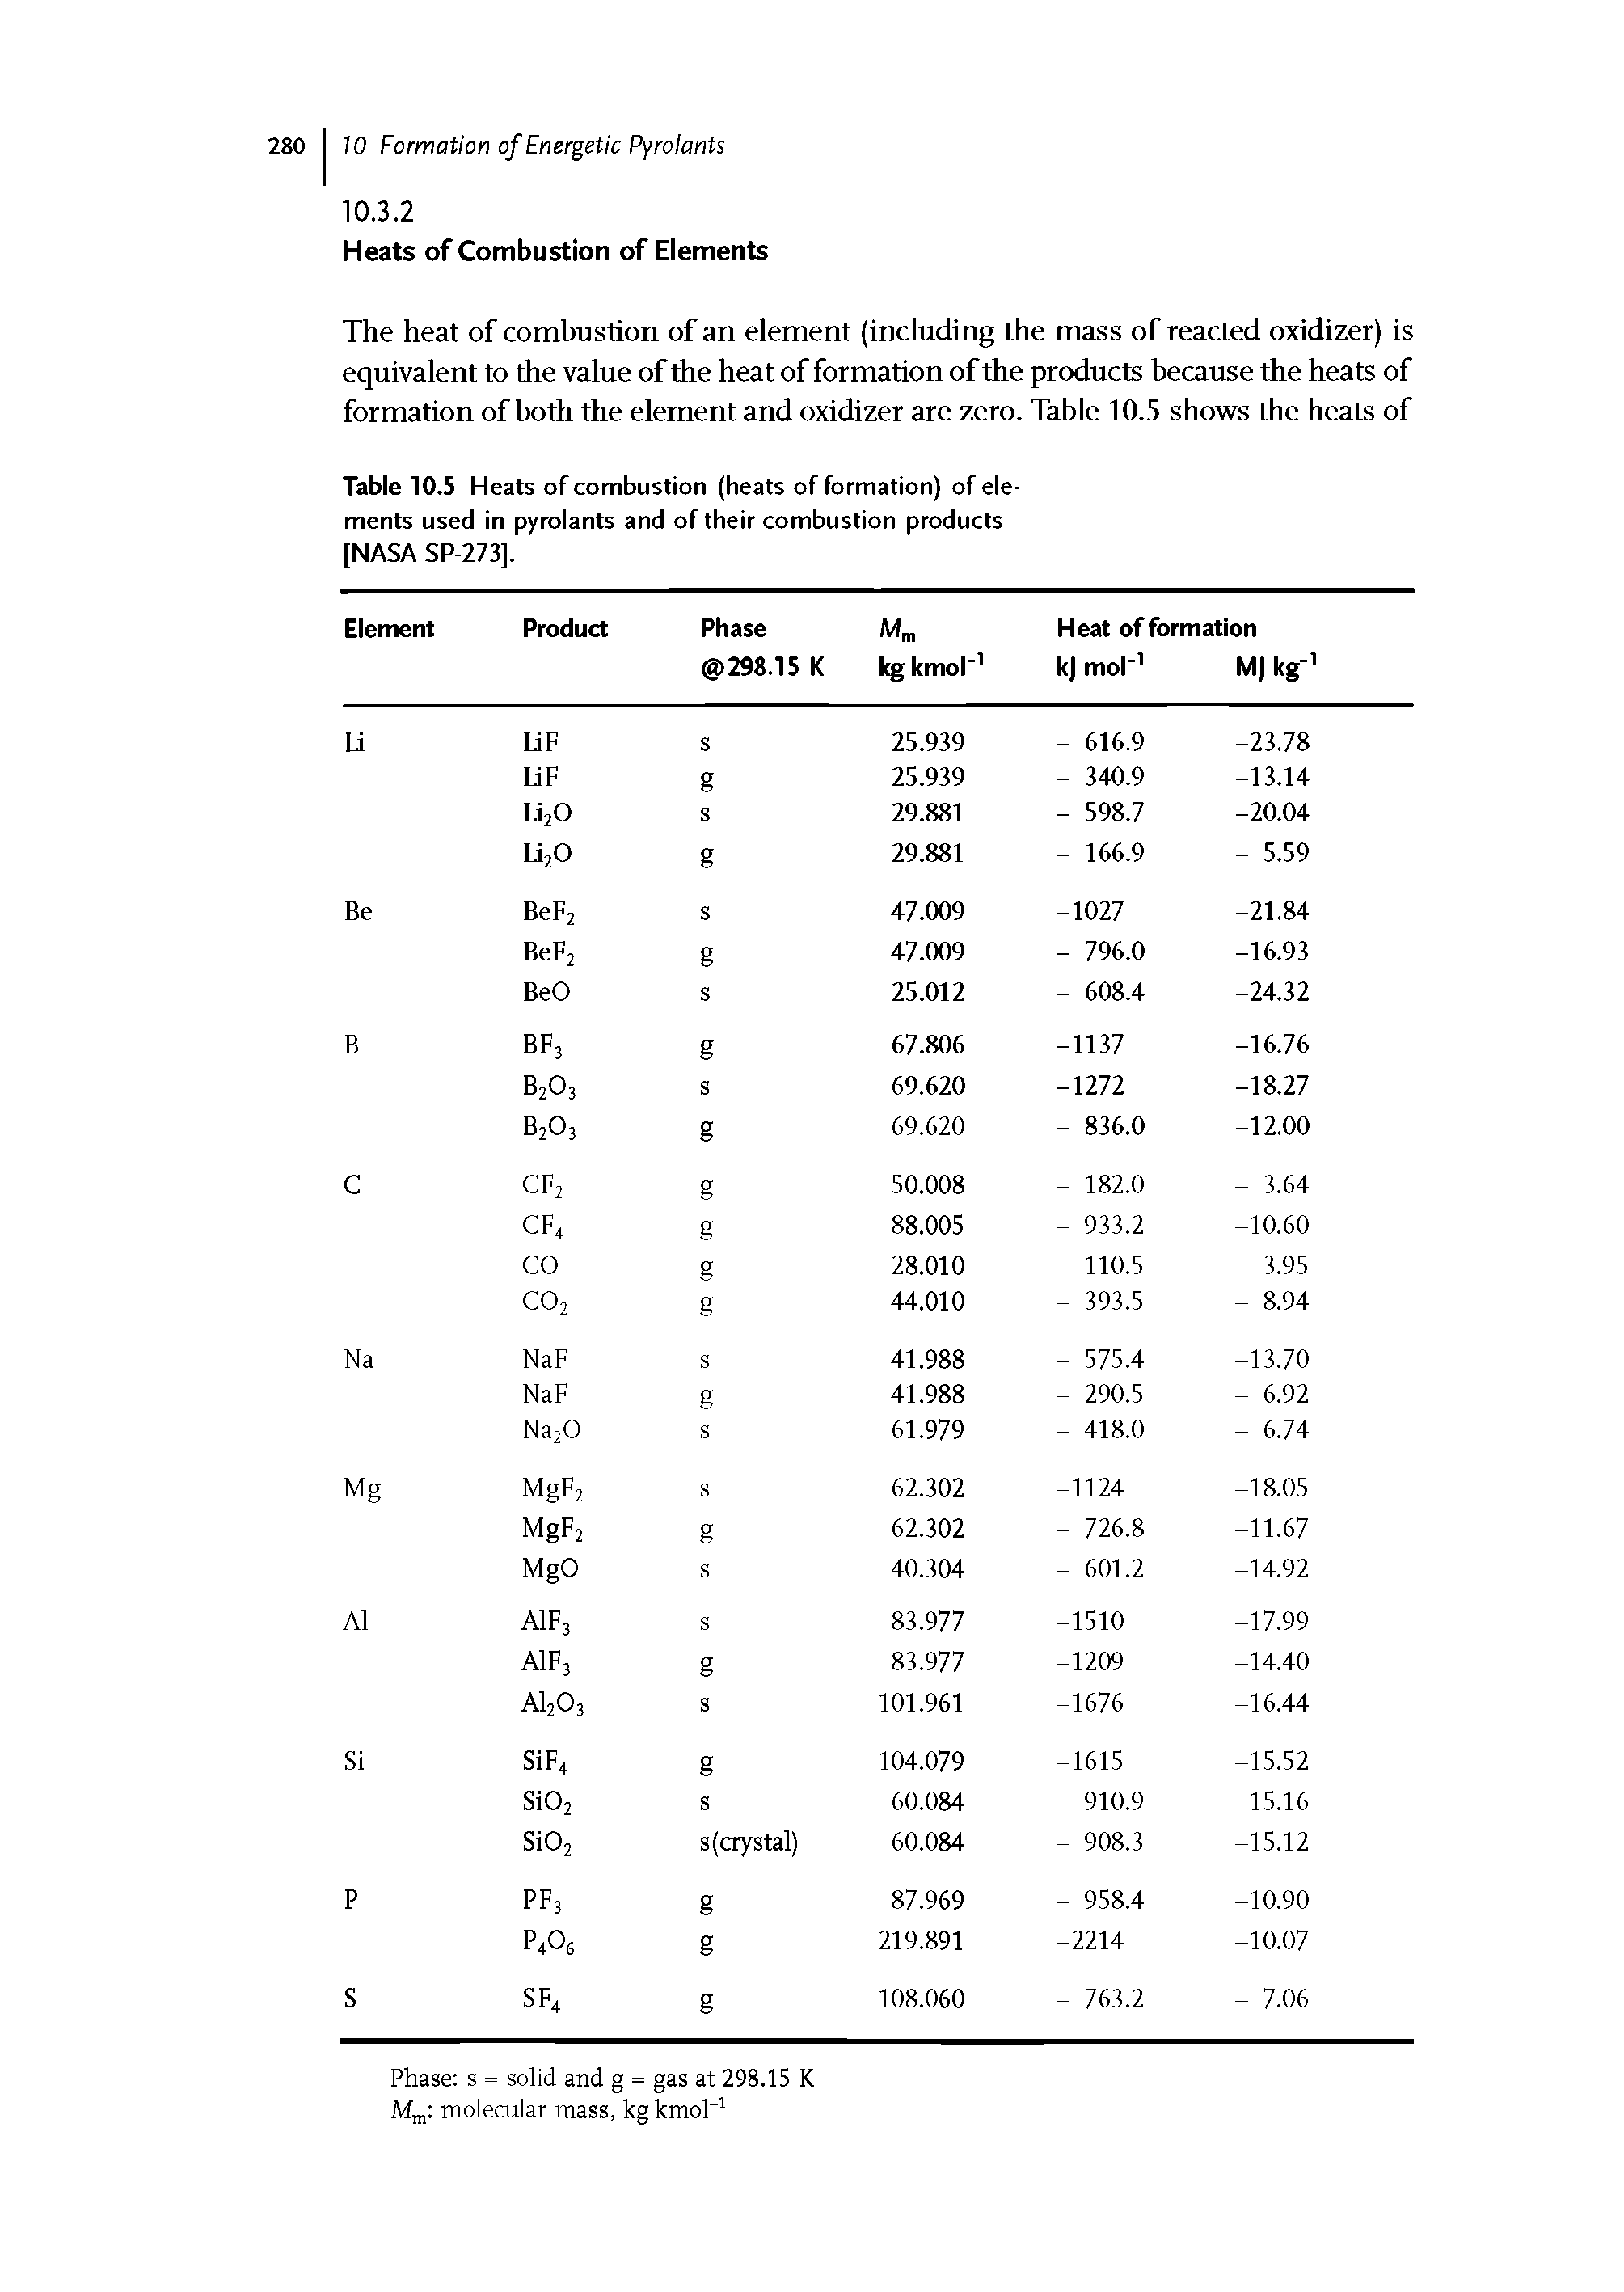 Table 10.5 Heats of combustion (heats of formation) of elements used in pyrolants and of their combustion products [NASA SP-273].